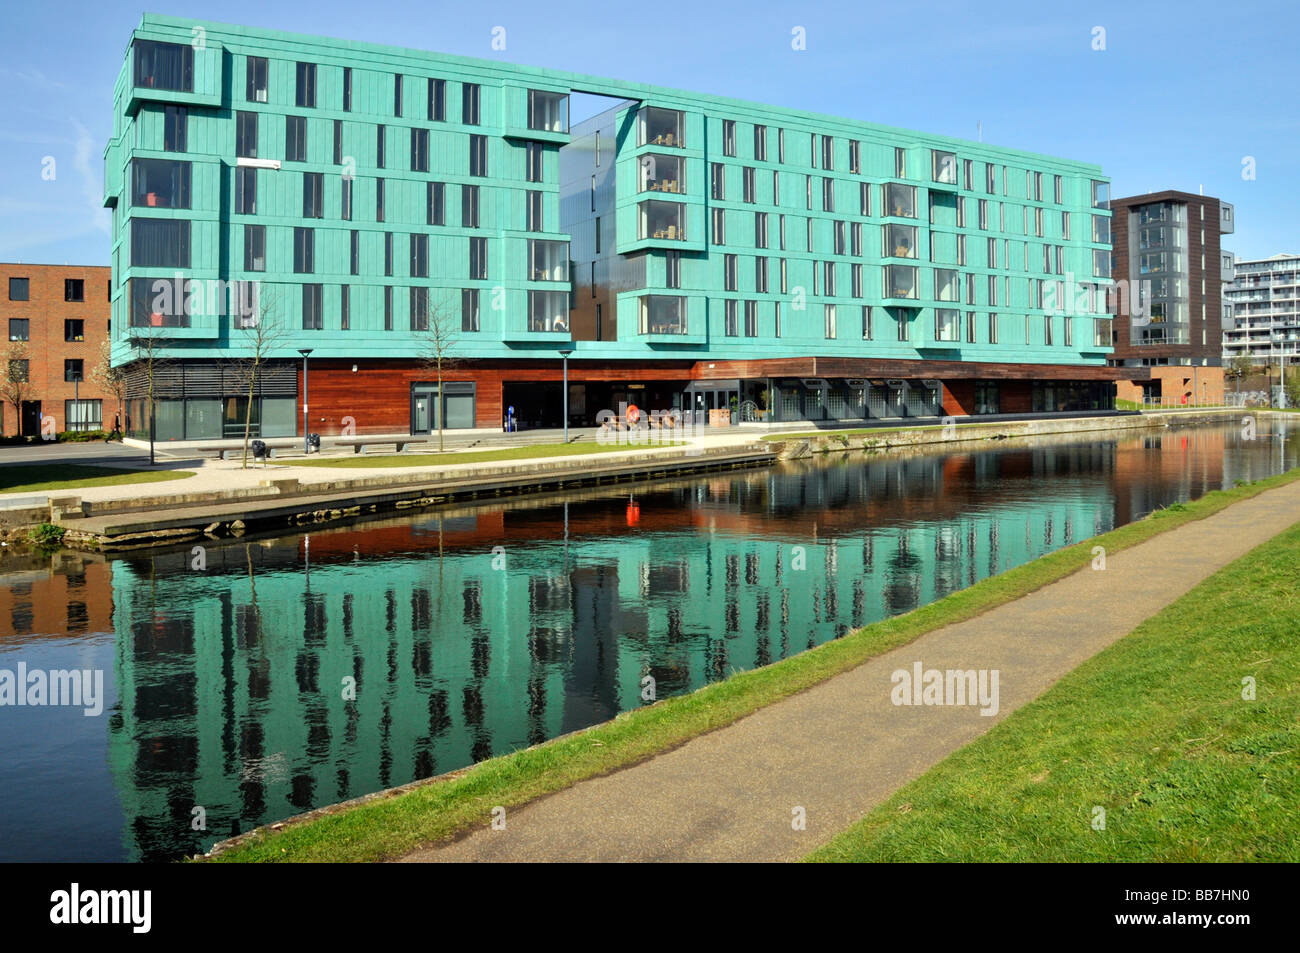 The Regents canal Mile End towpaths with Queen Mary University of London buildings alongside Stock Photo